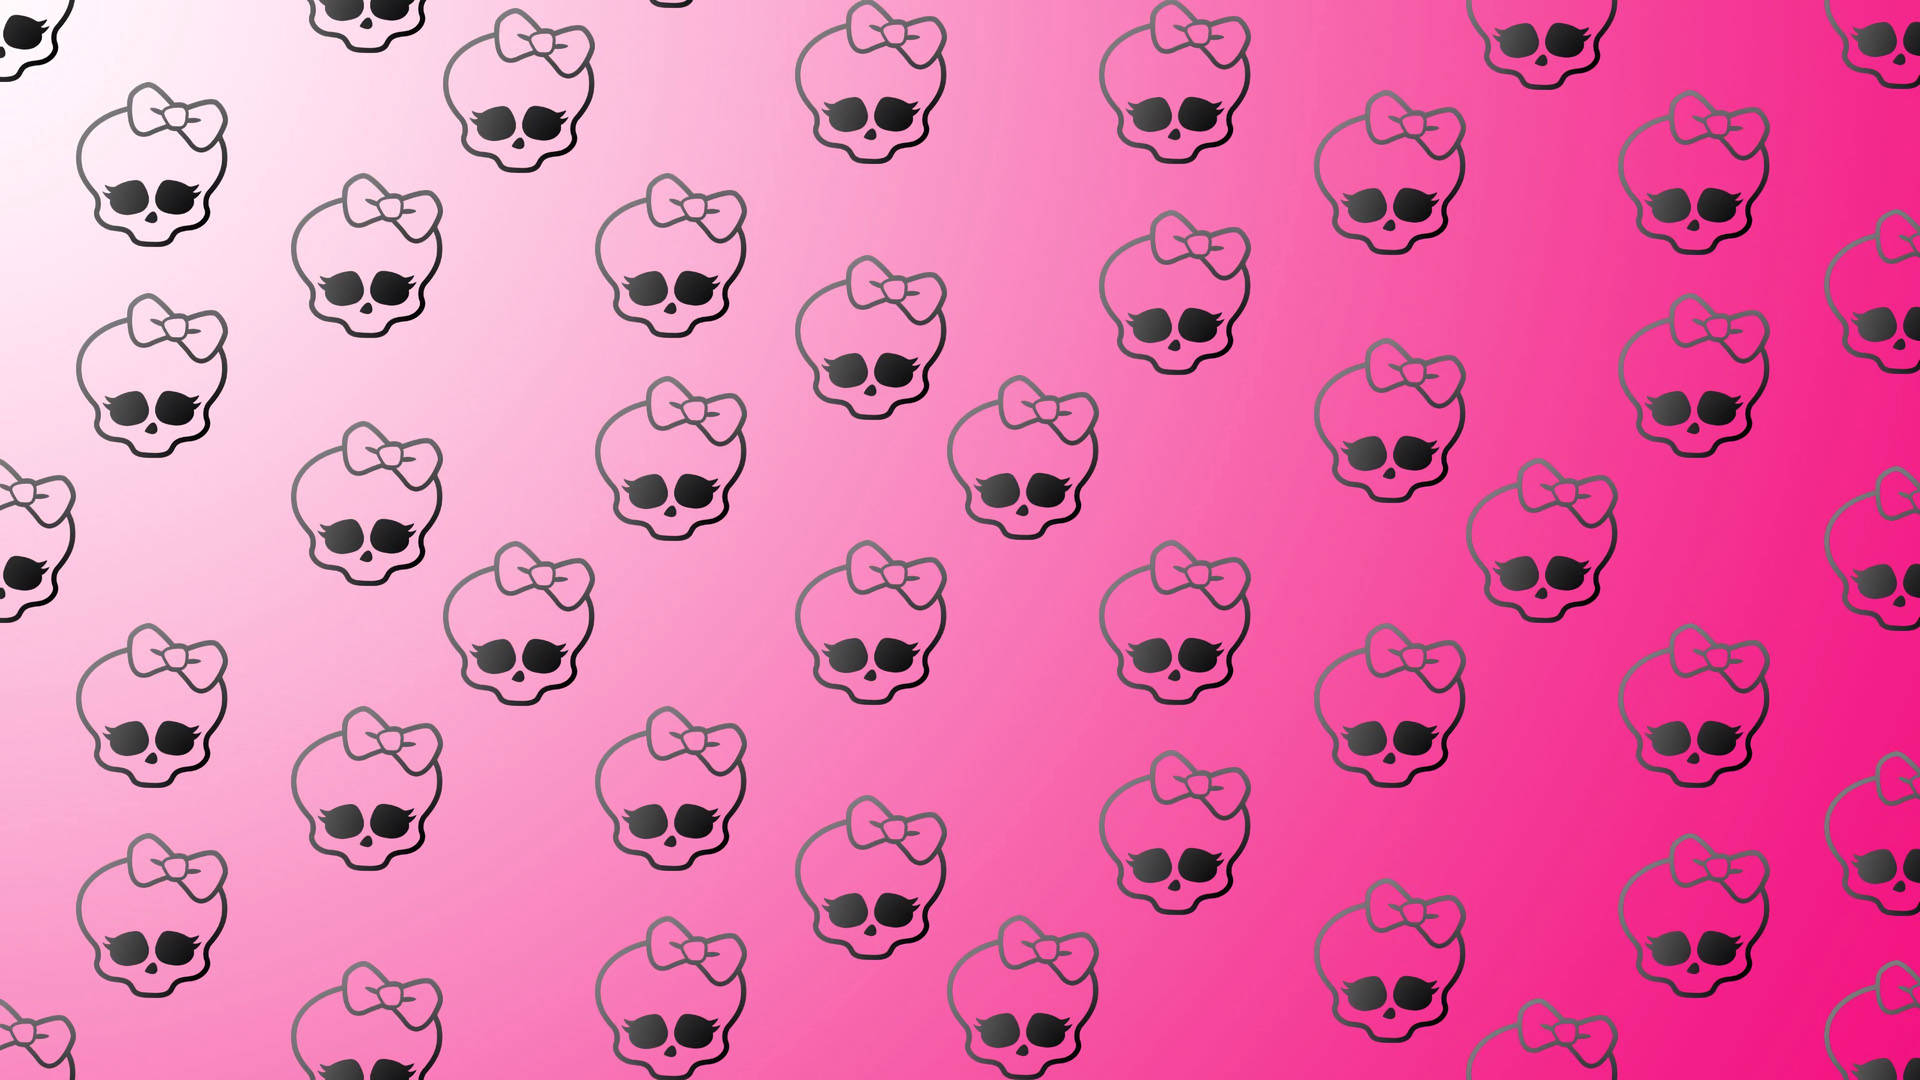 Haunted by a Pink Skull Wallpaper